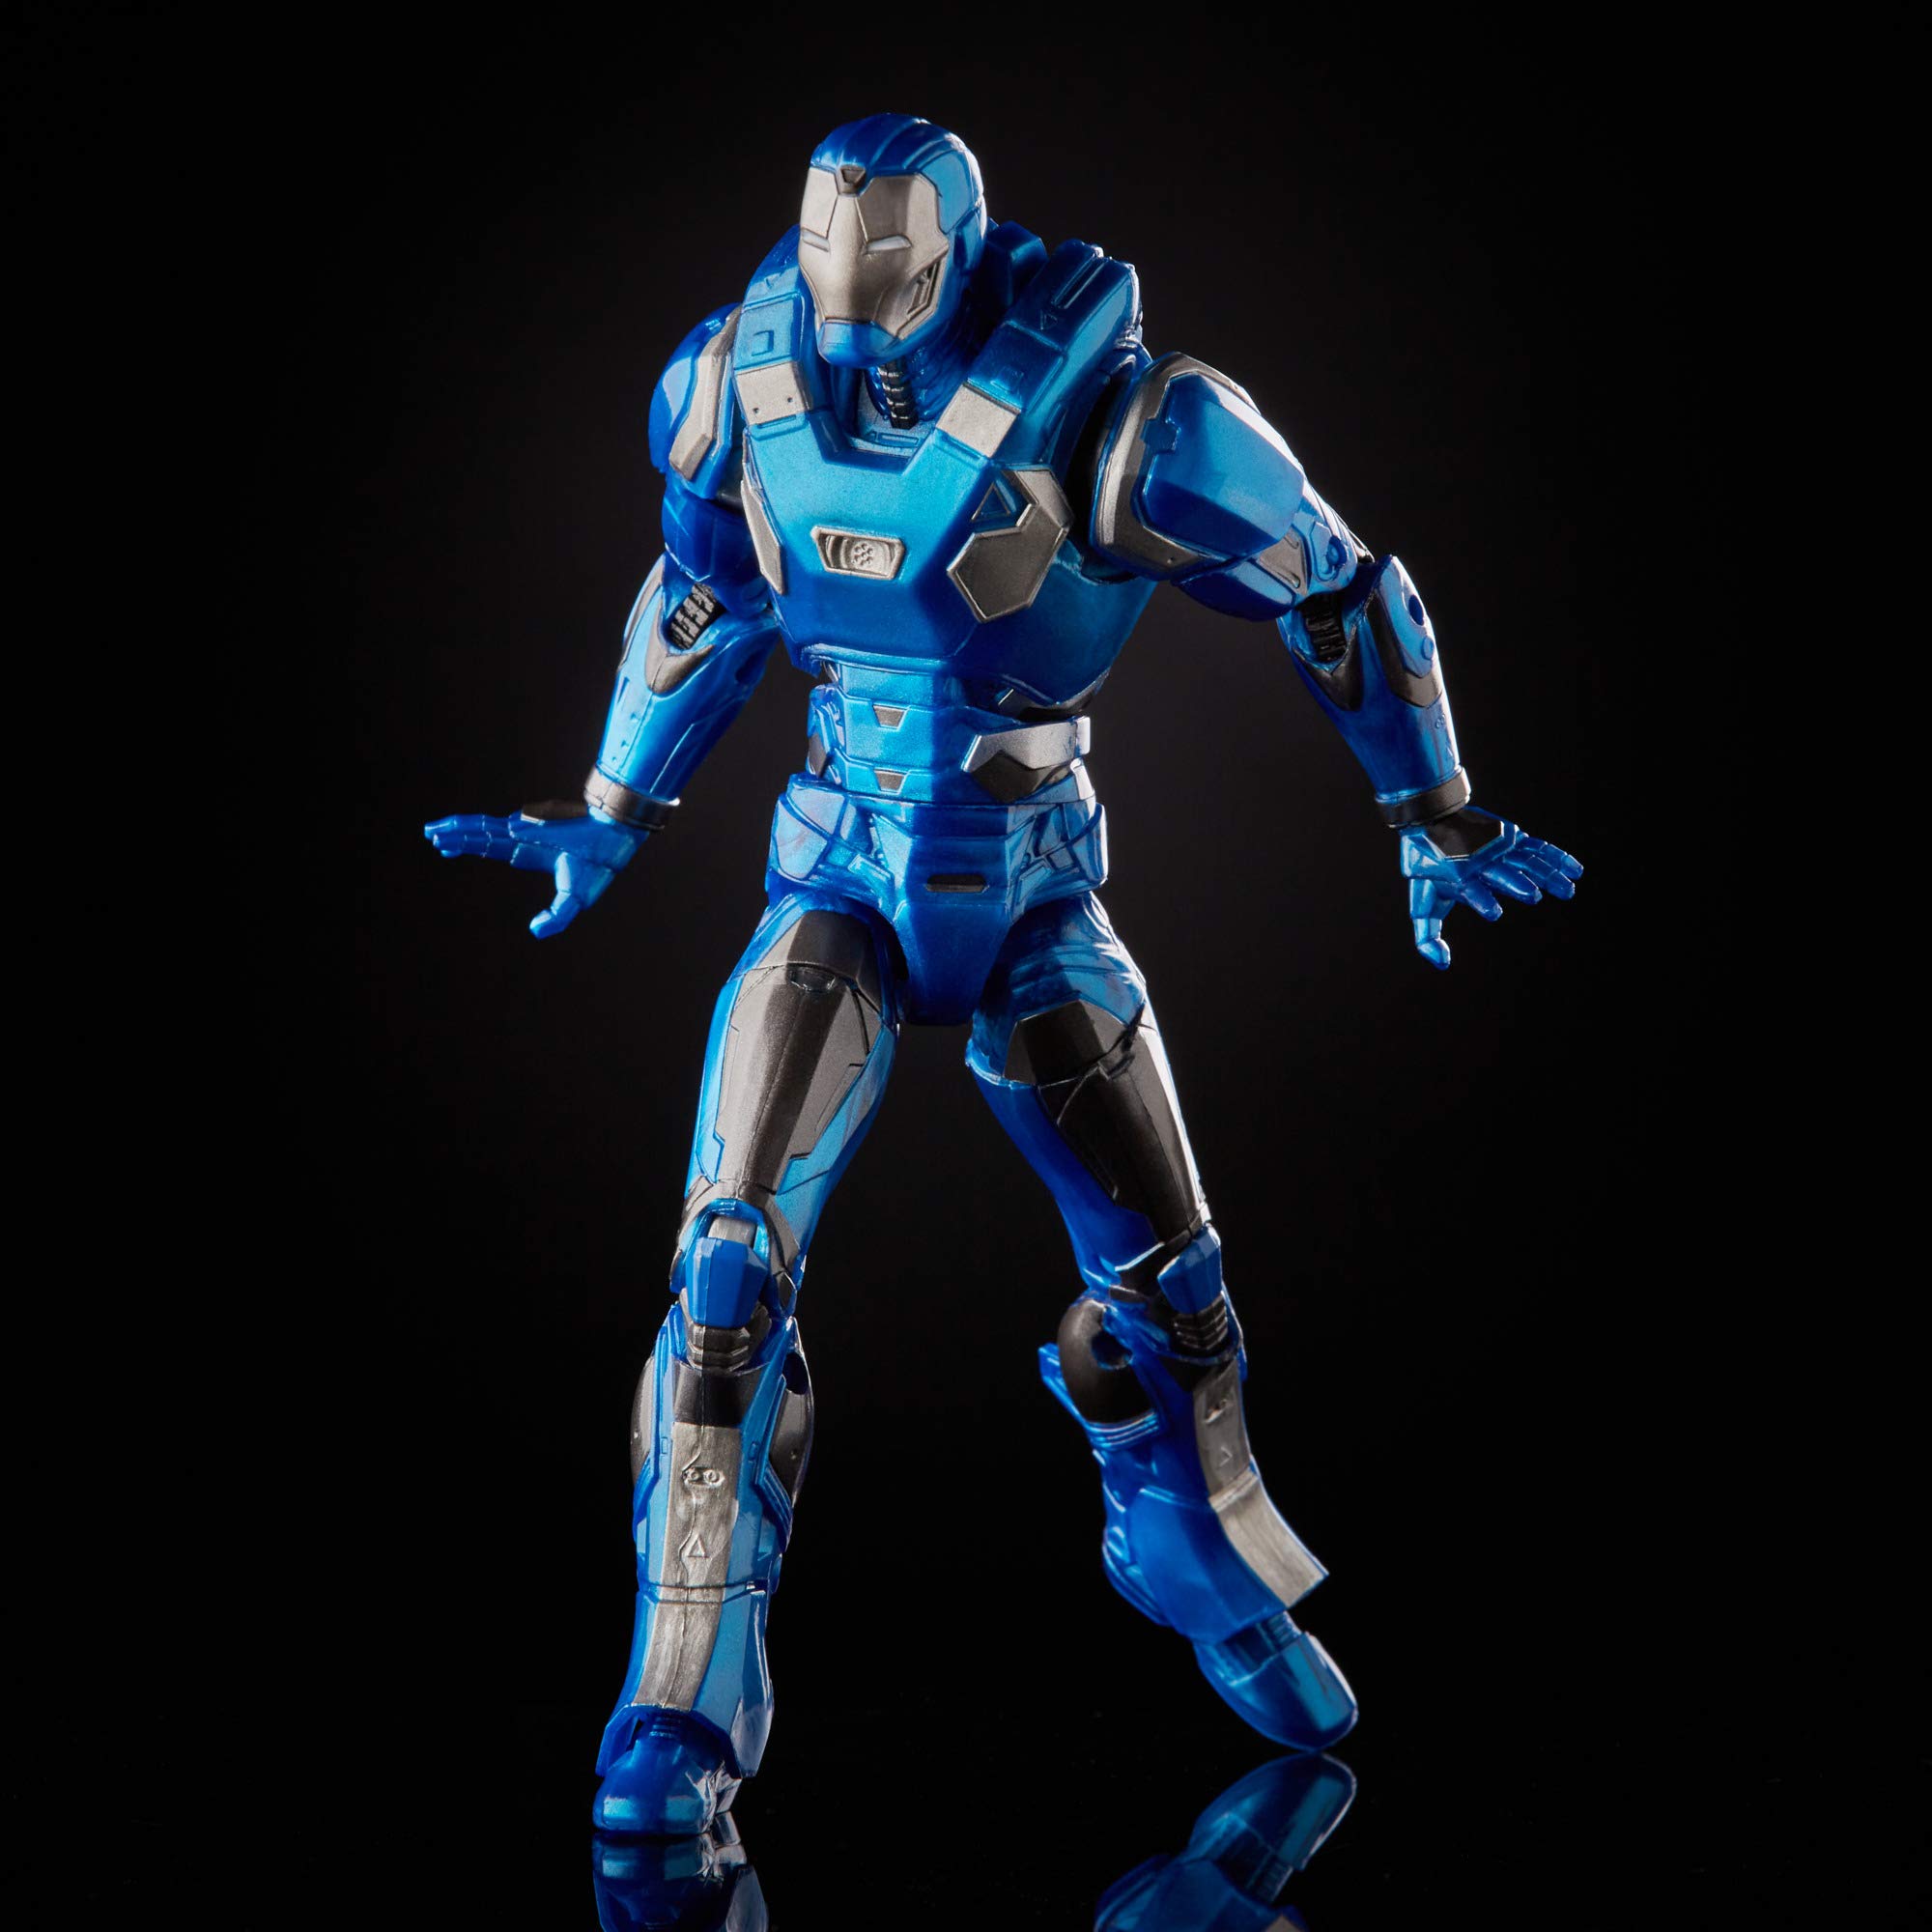 Avengers Hasbro Marvel Legends Series Gamerverse 6-inch Collectible Atmosphere Iron Man Action Figure Toy, Ages 4 and Up